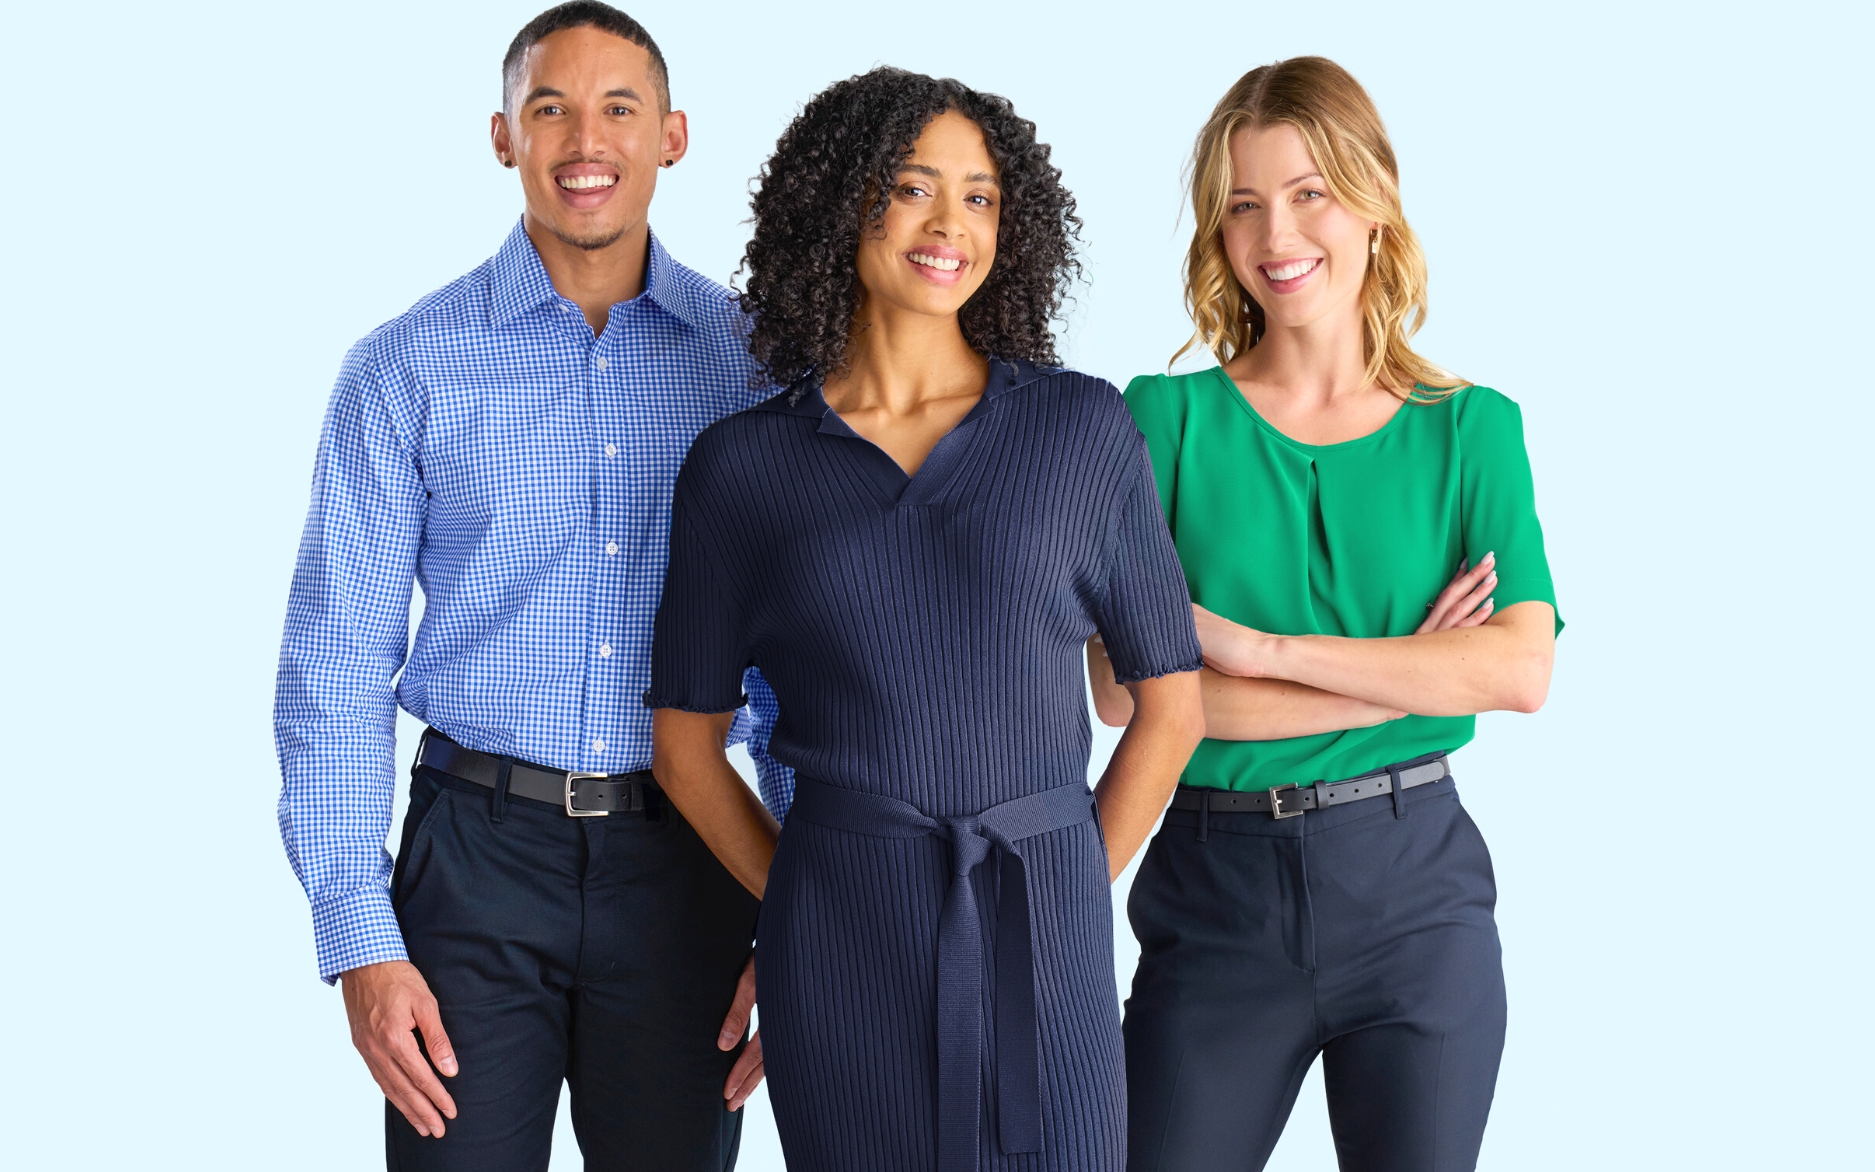 Healthcare Uniforms: A photo of two smiling women and one man wearing Designs To You healthcare uniforms.